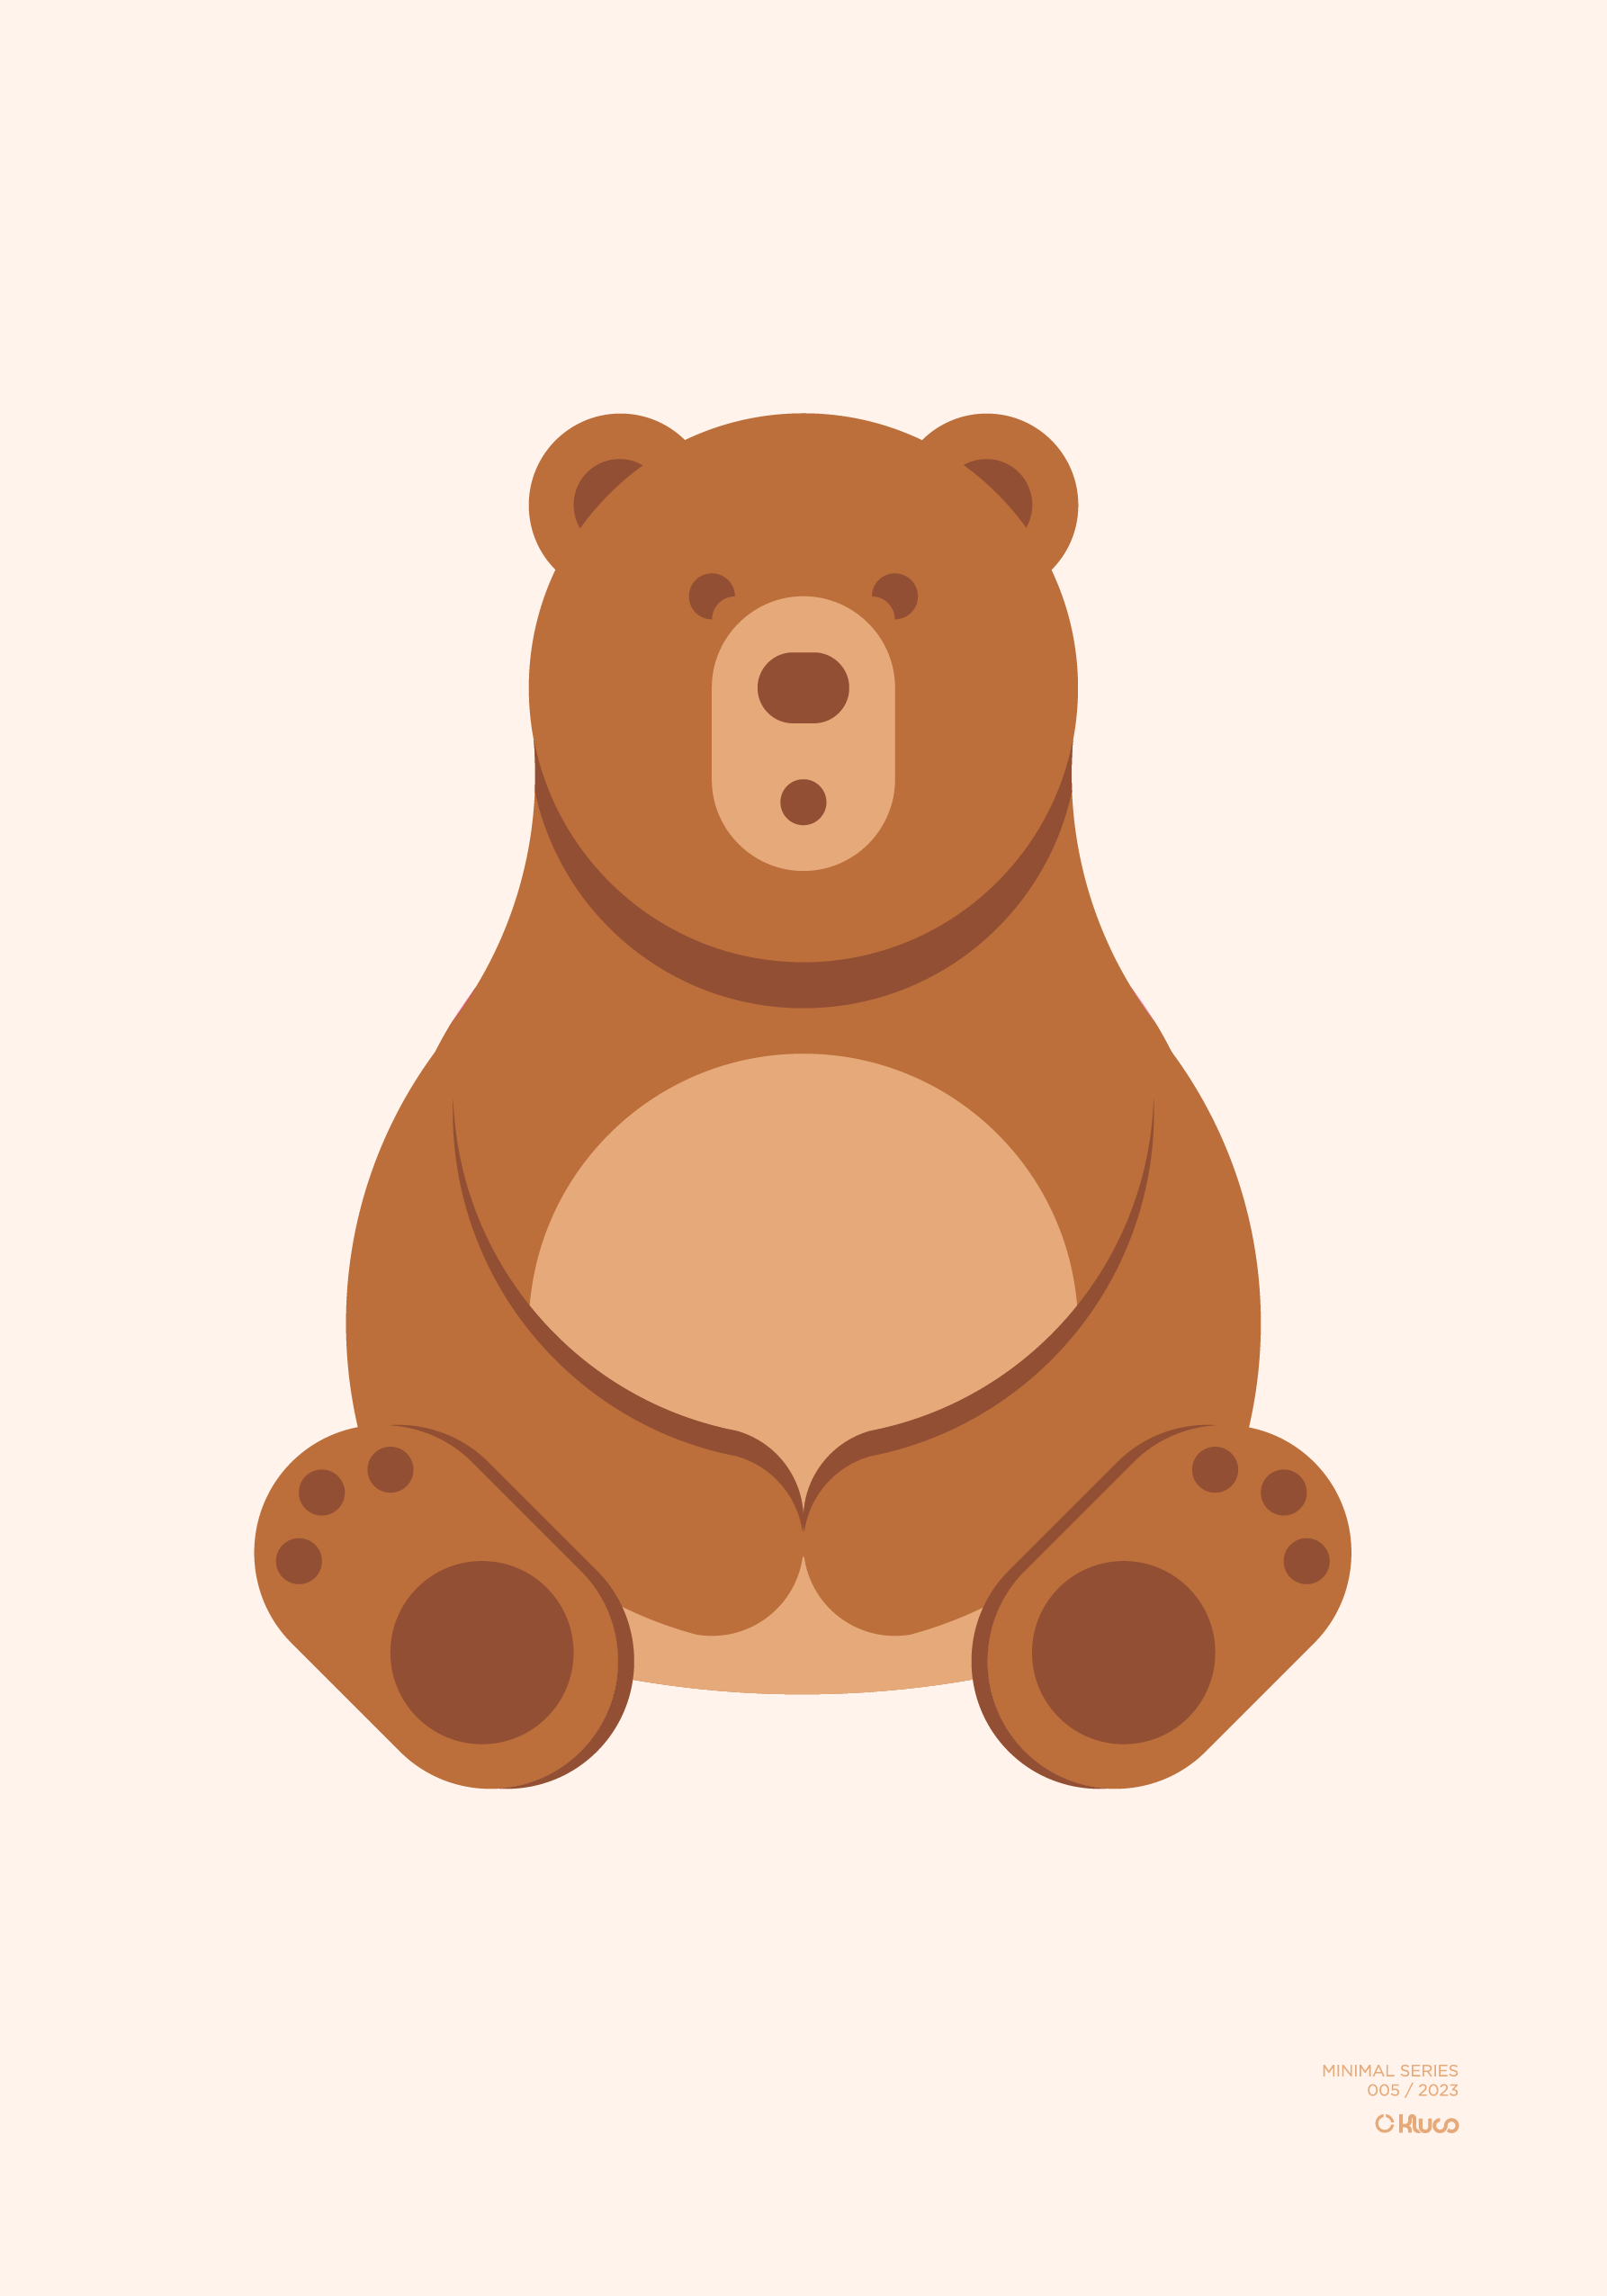 Minimalist-style poster of a bear